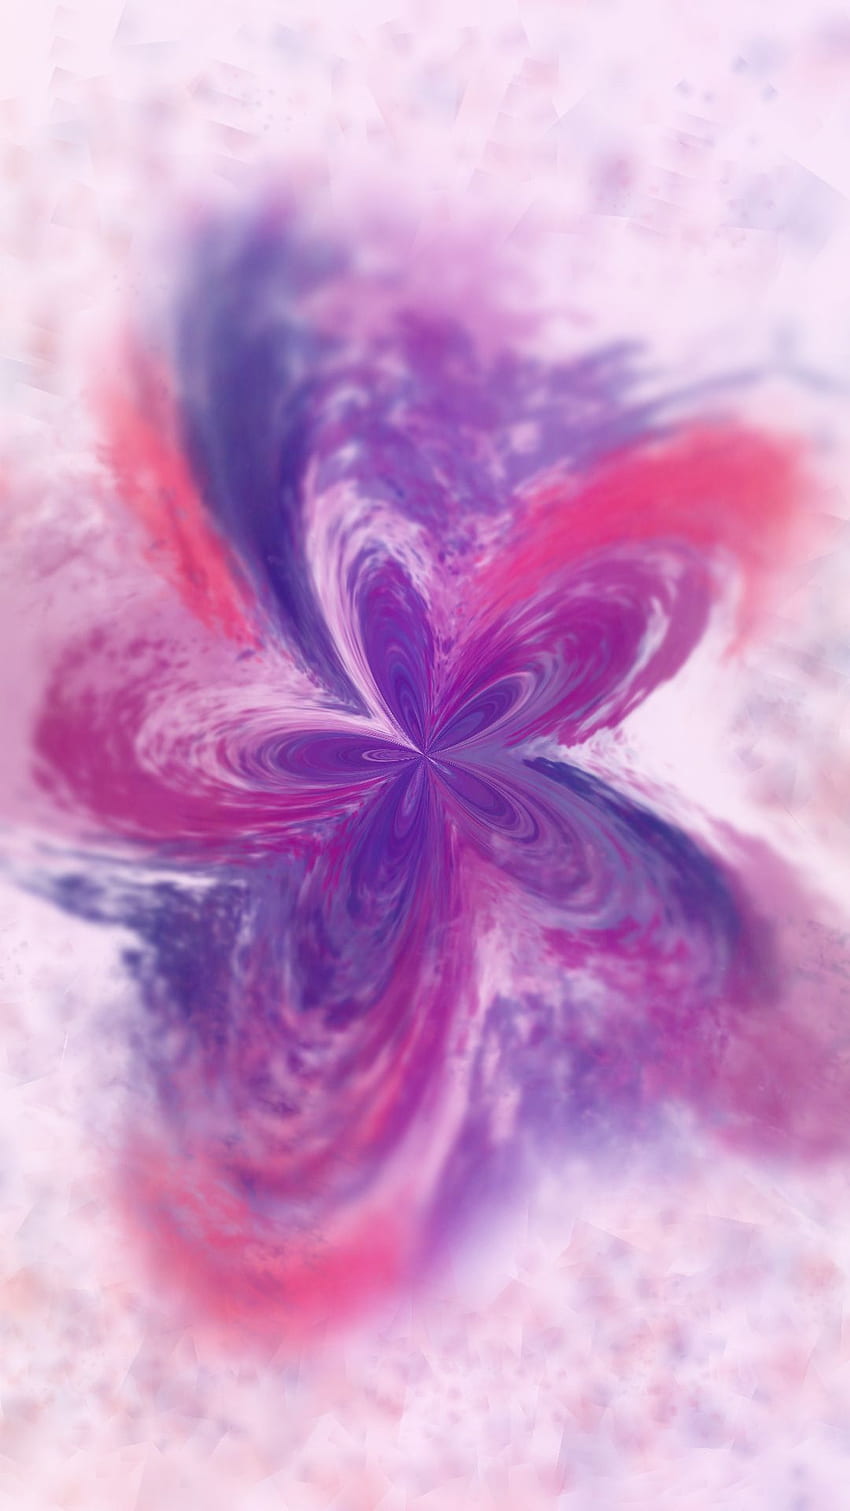 With Abstract Flower Made From Vivid Colors, 1080&1920 (9 16) HD phone wallpaper